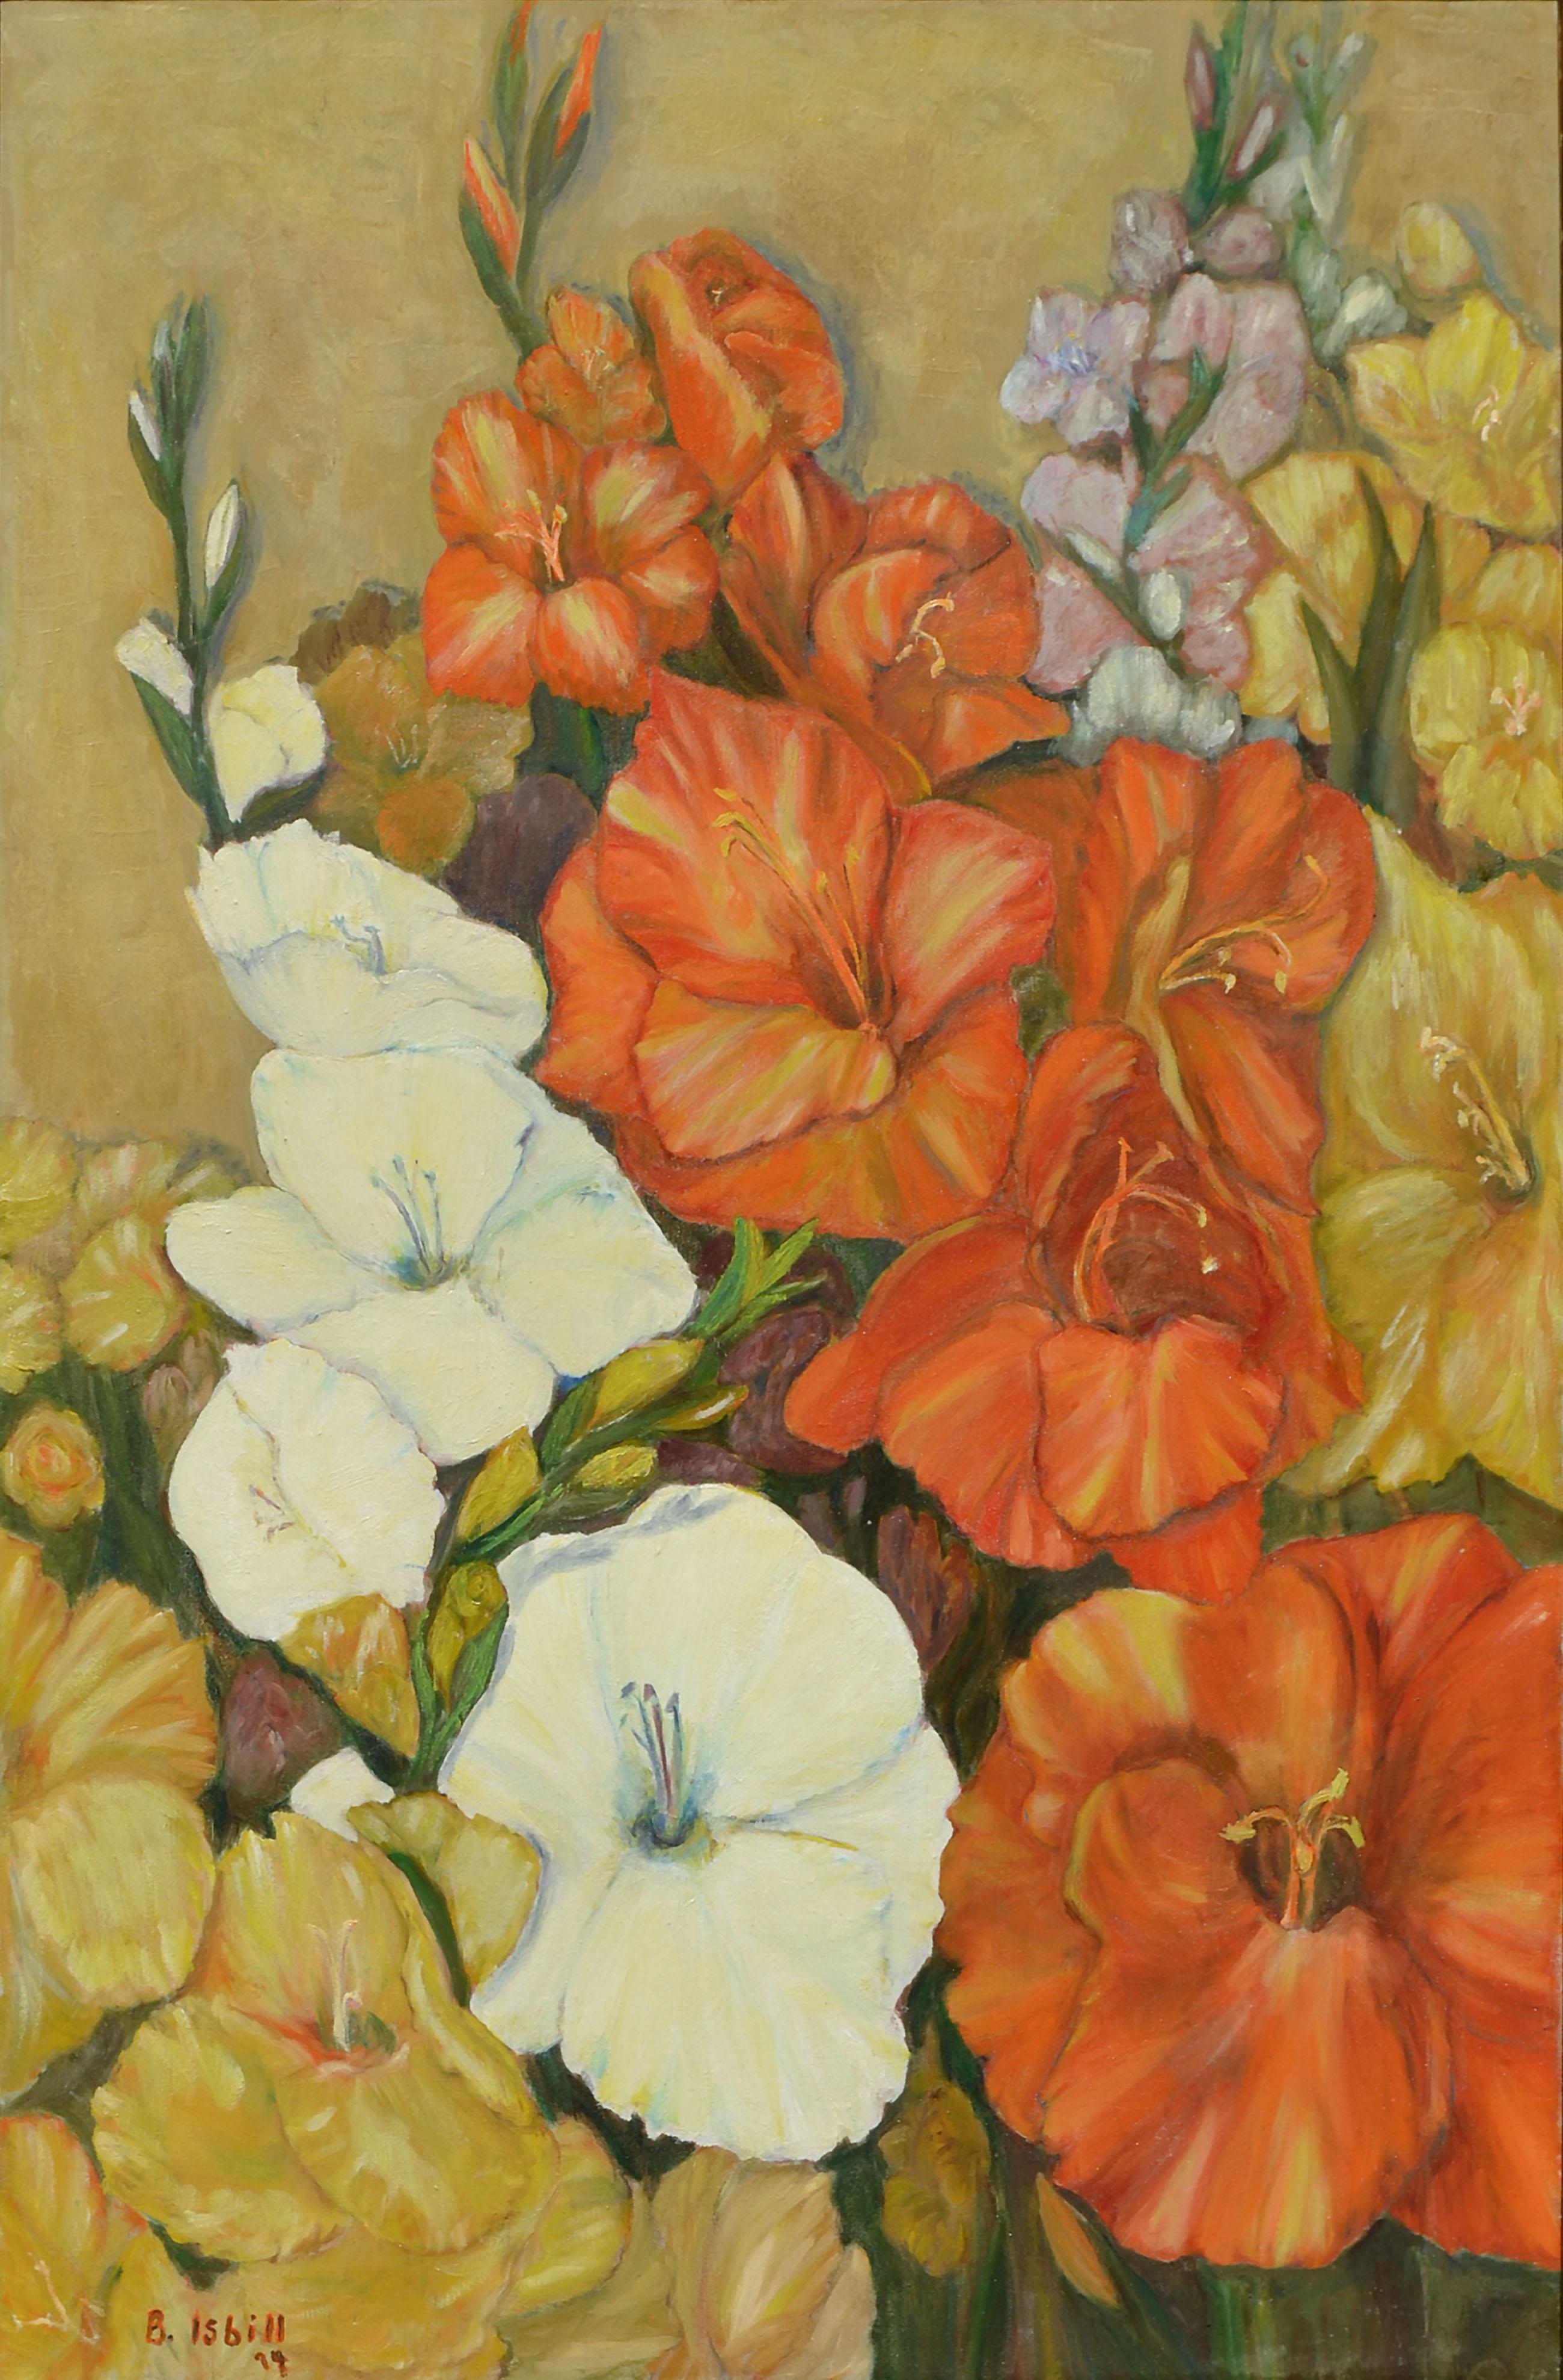 Gladiolas in Bloom - 1970's Floral Still Life - Painting by B Isbill